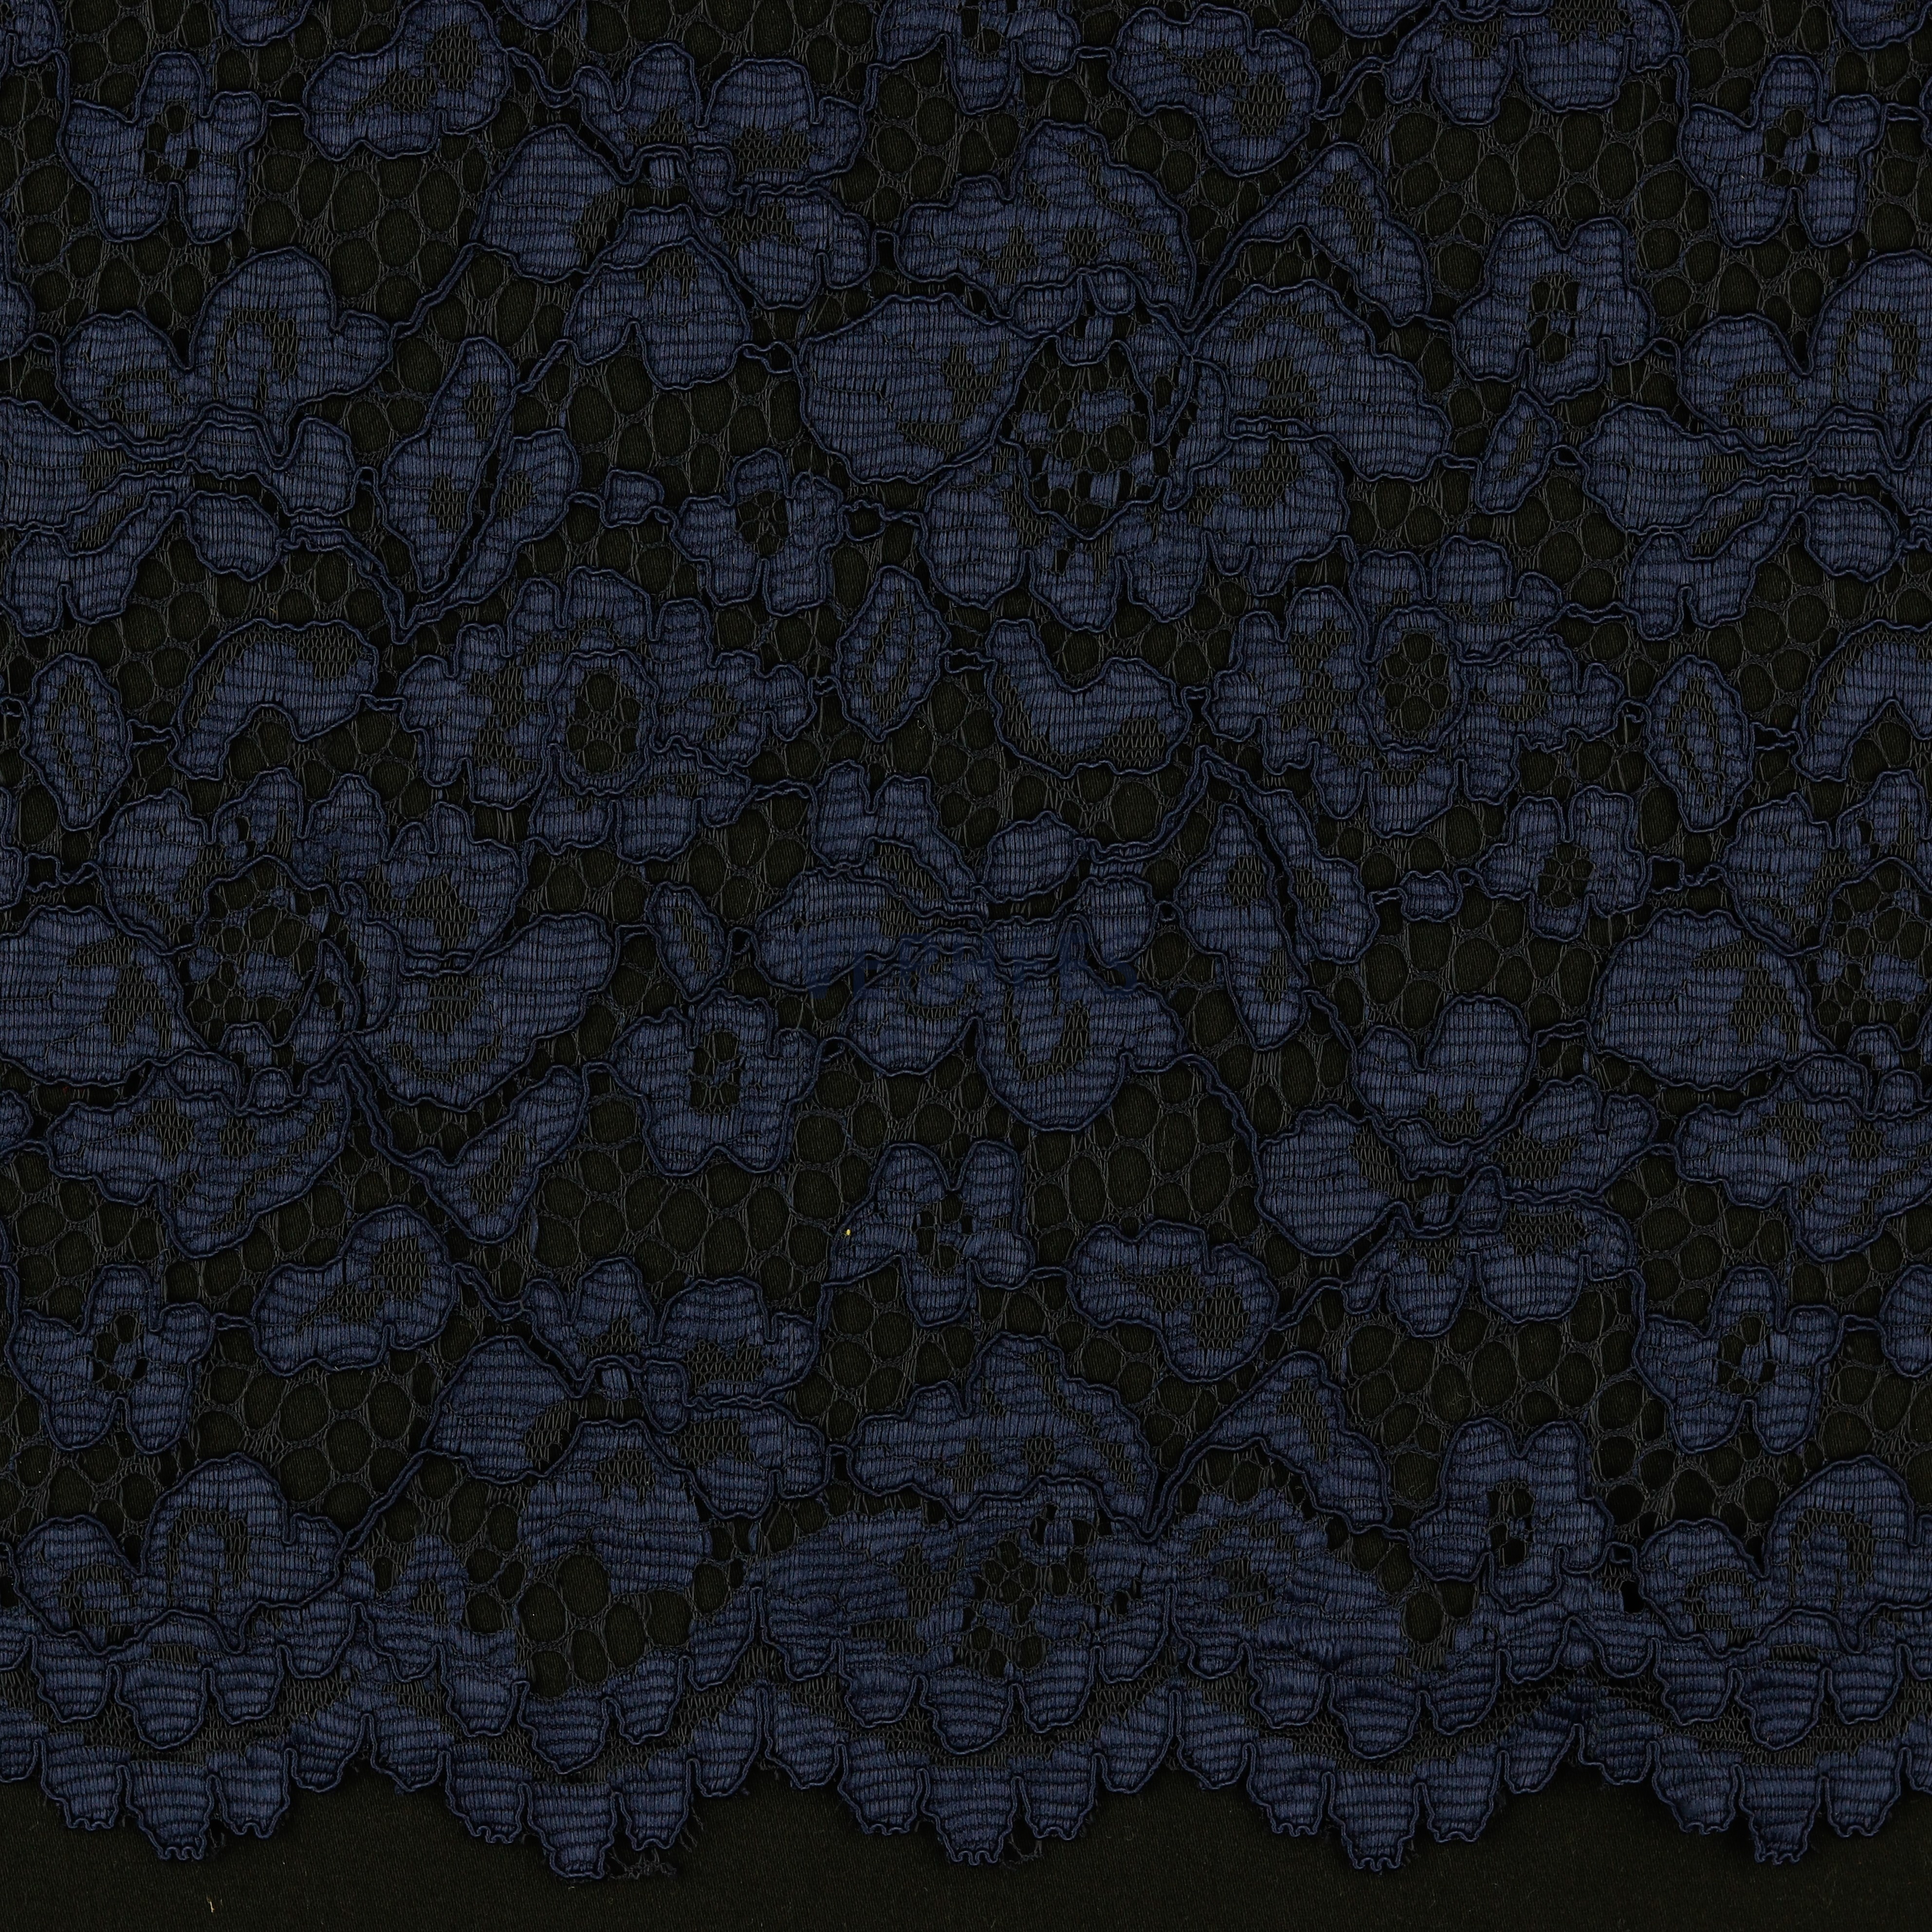 LACE BORDER 2 SIDES NAVY (high resolution)